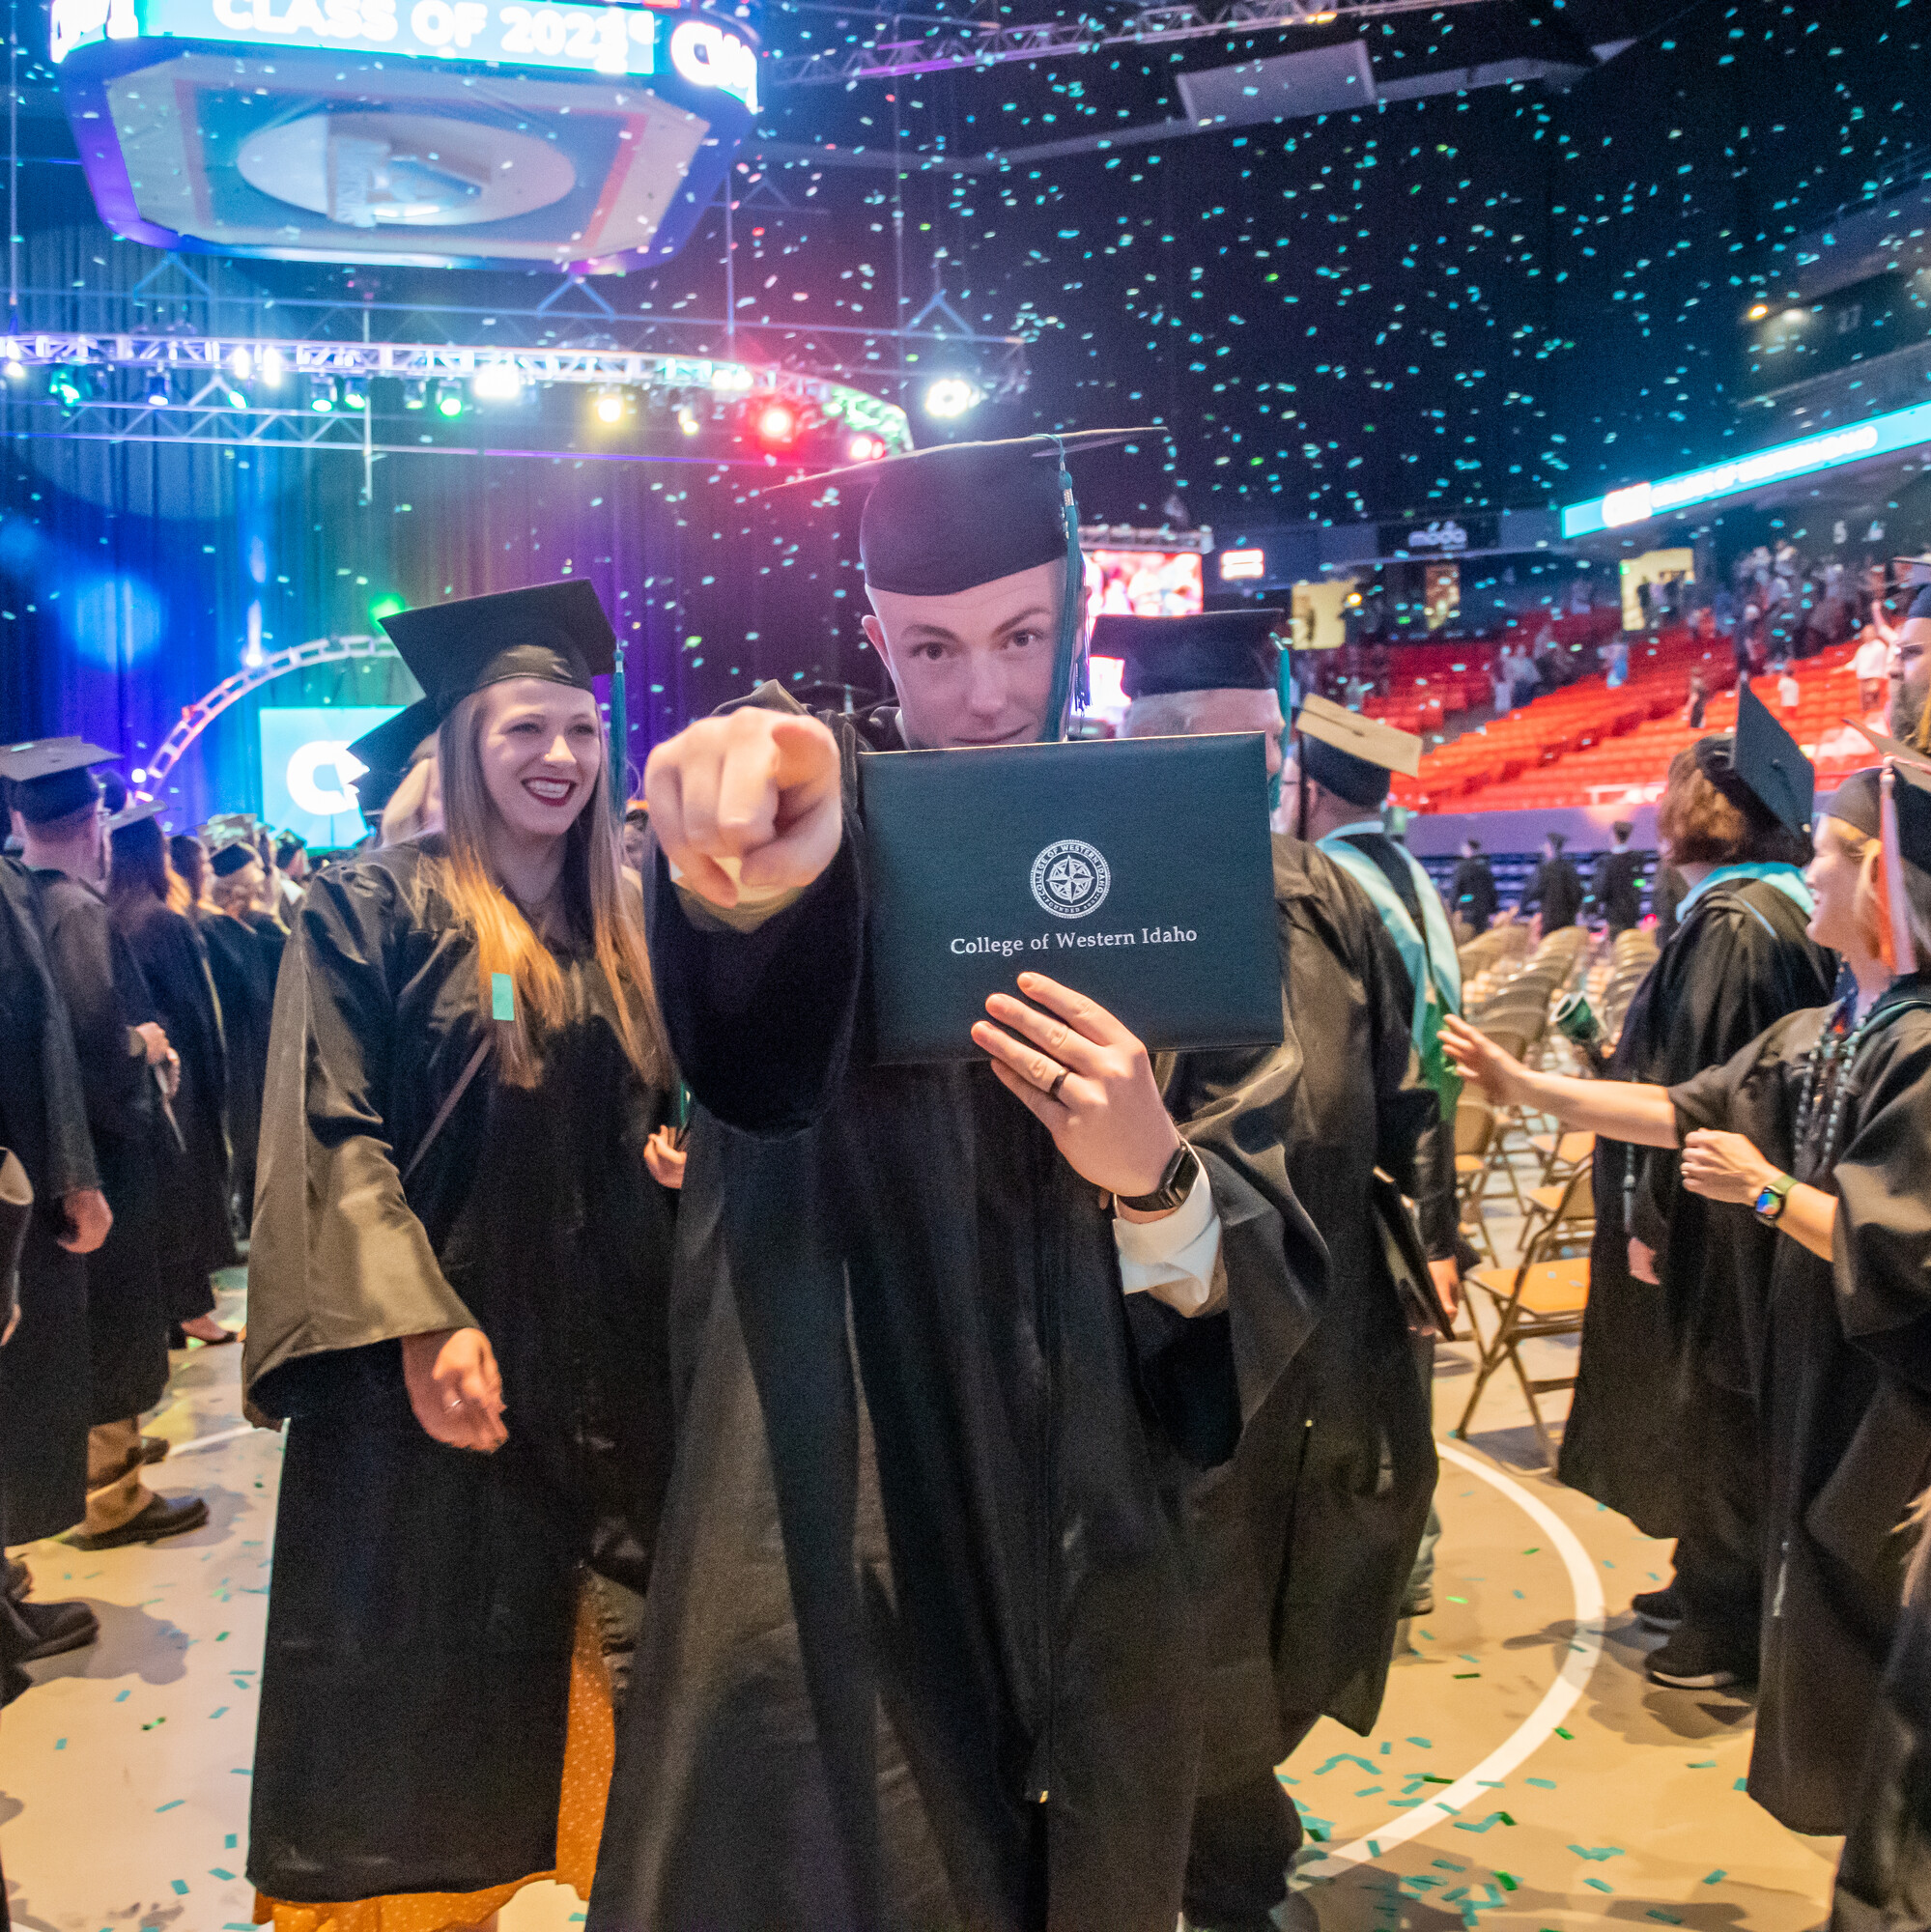 Graduate holding degree and pointing at camera